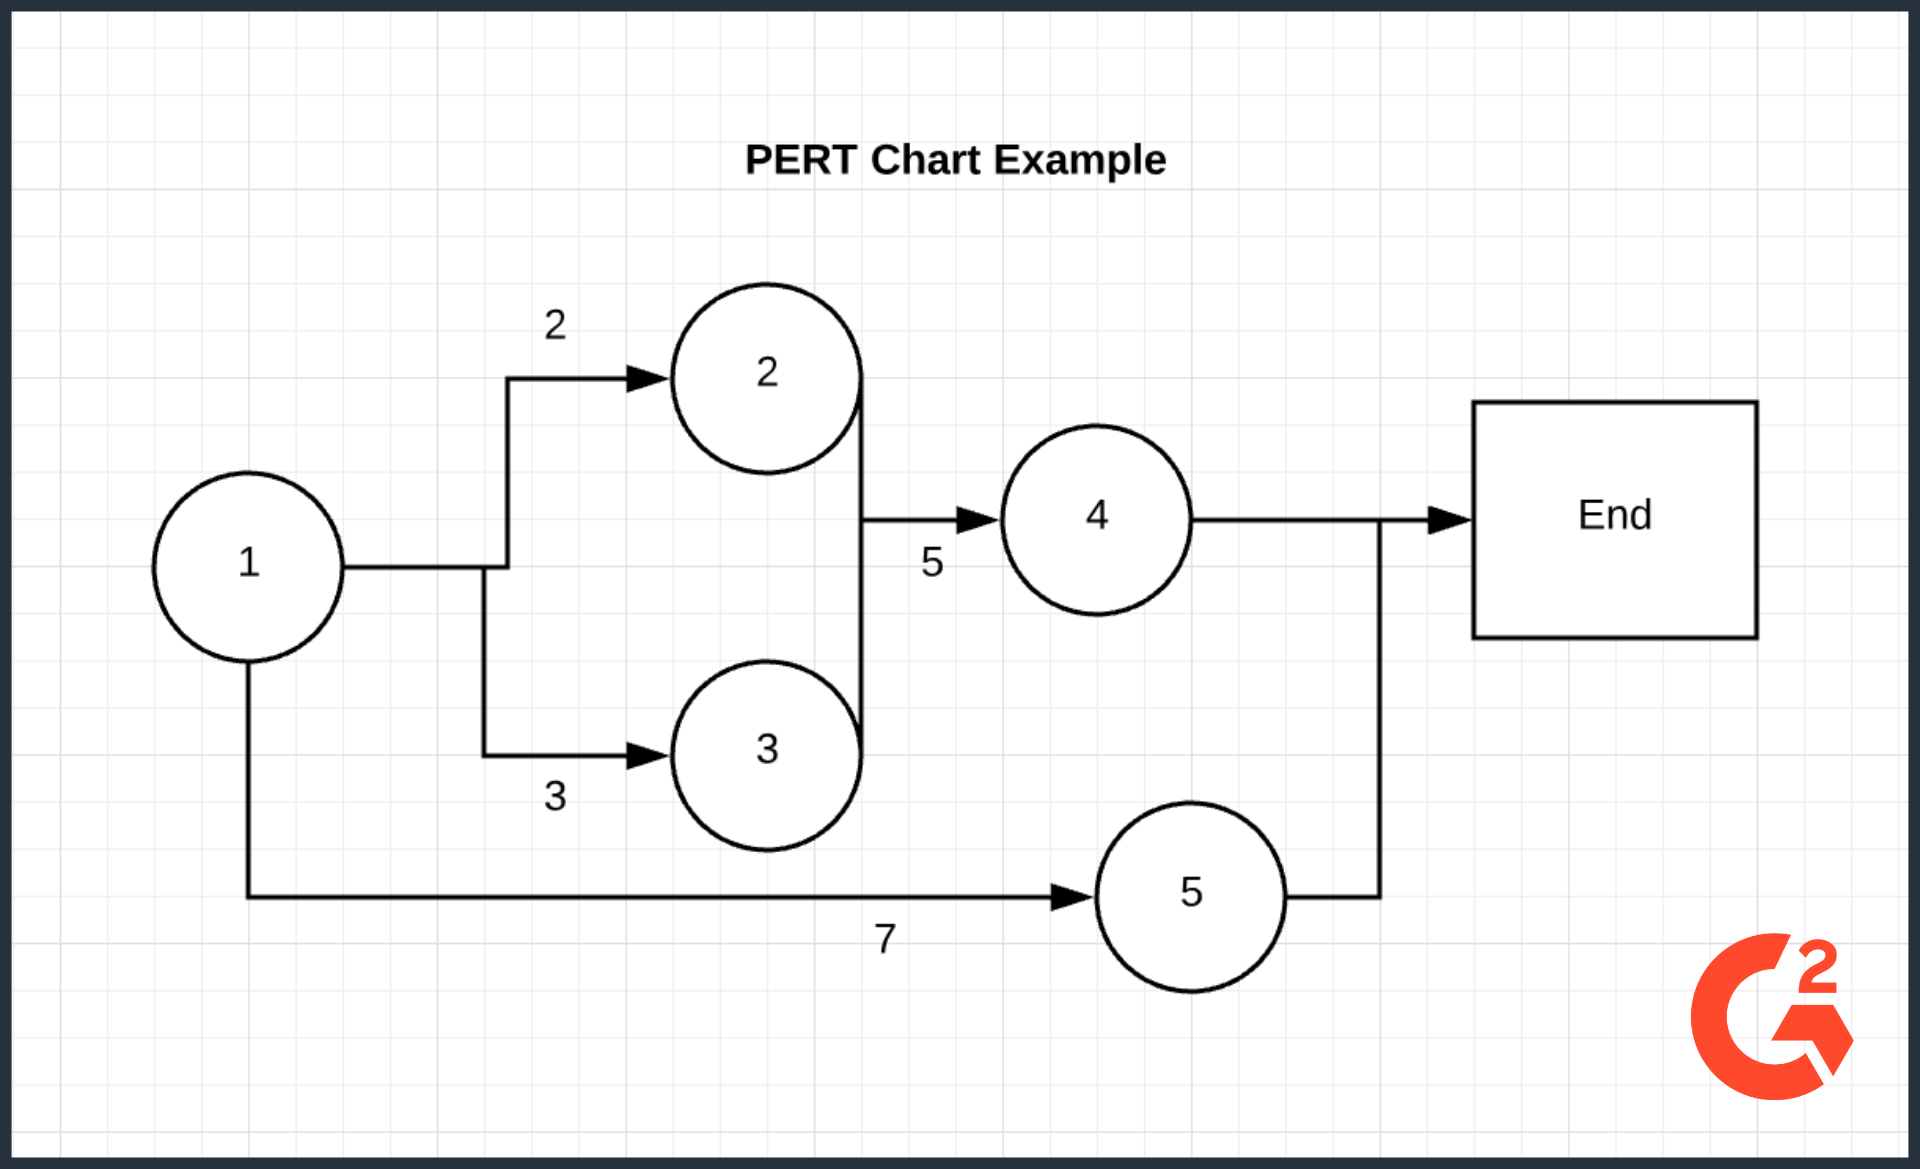 How To Read A Pert Chart